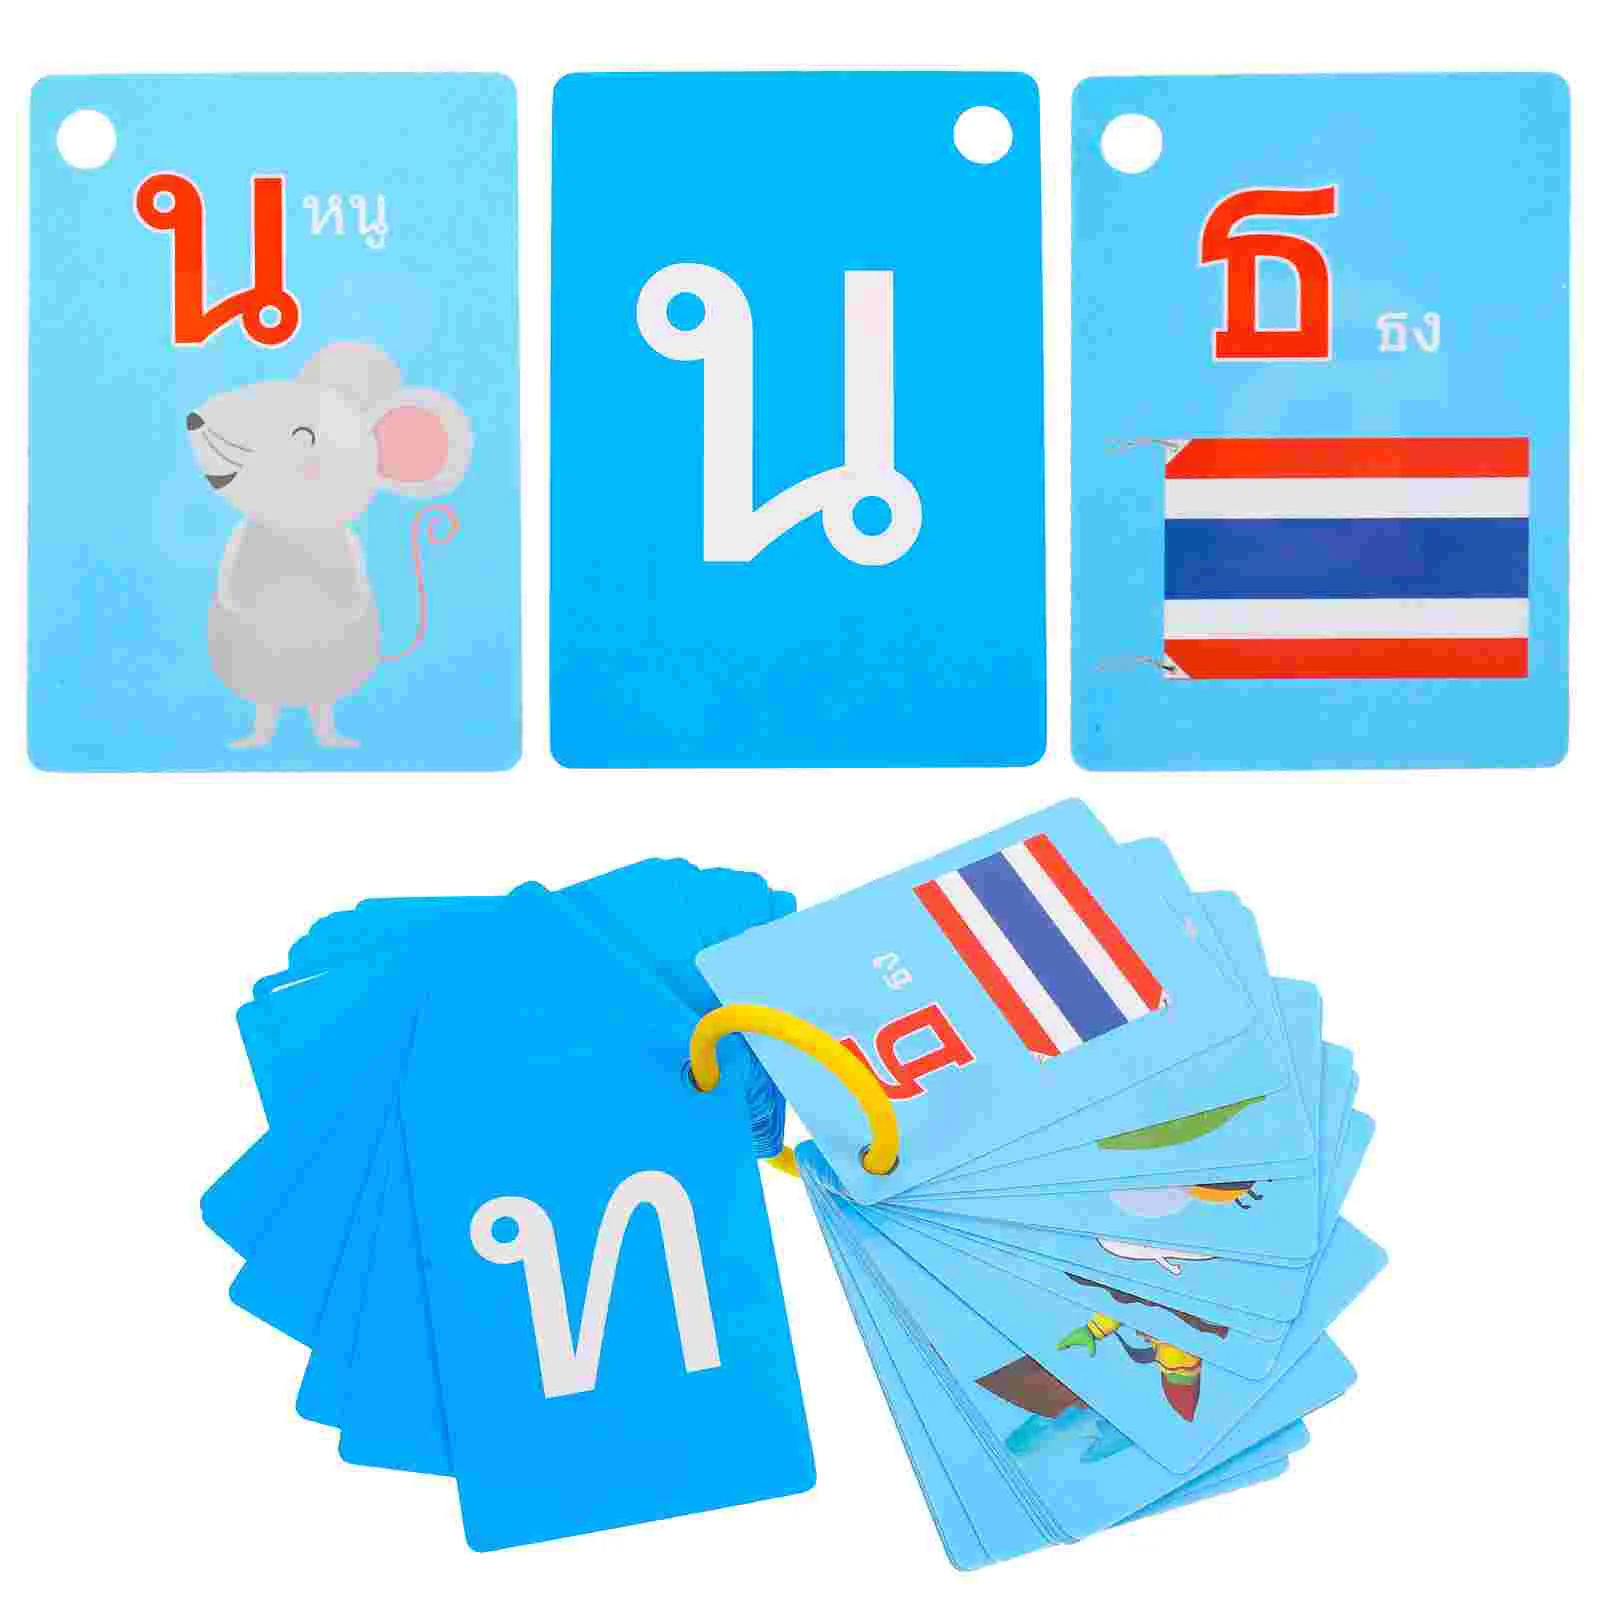 

90 Pcs Study Cards Flash Learning Vocabulary Toys for Toddlers Thai Language Alphabet Educational Puzzle Preschool Kids